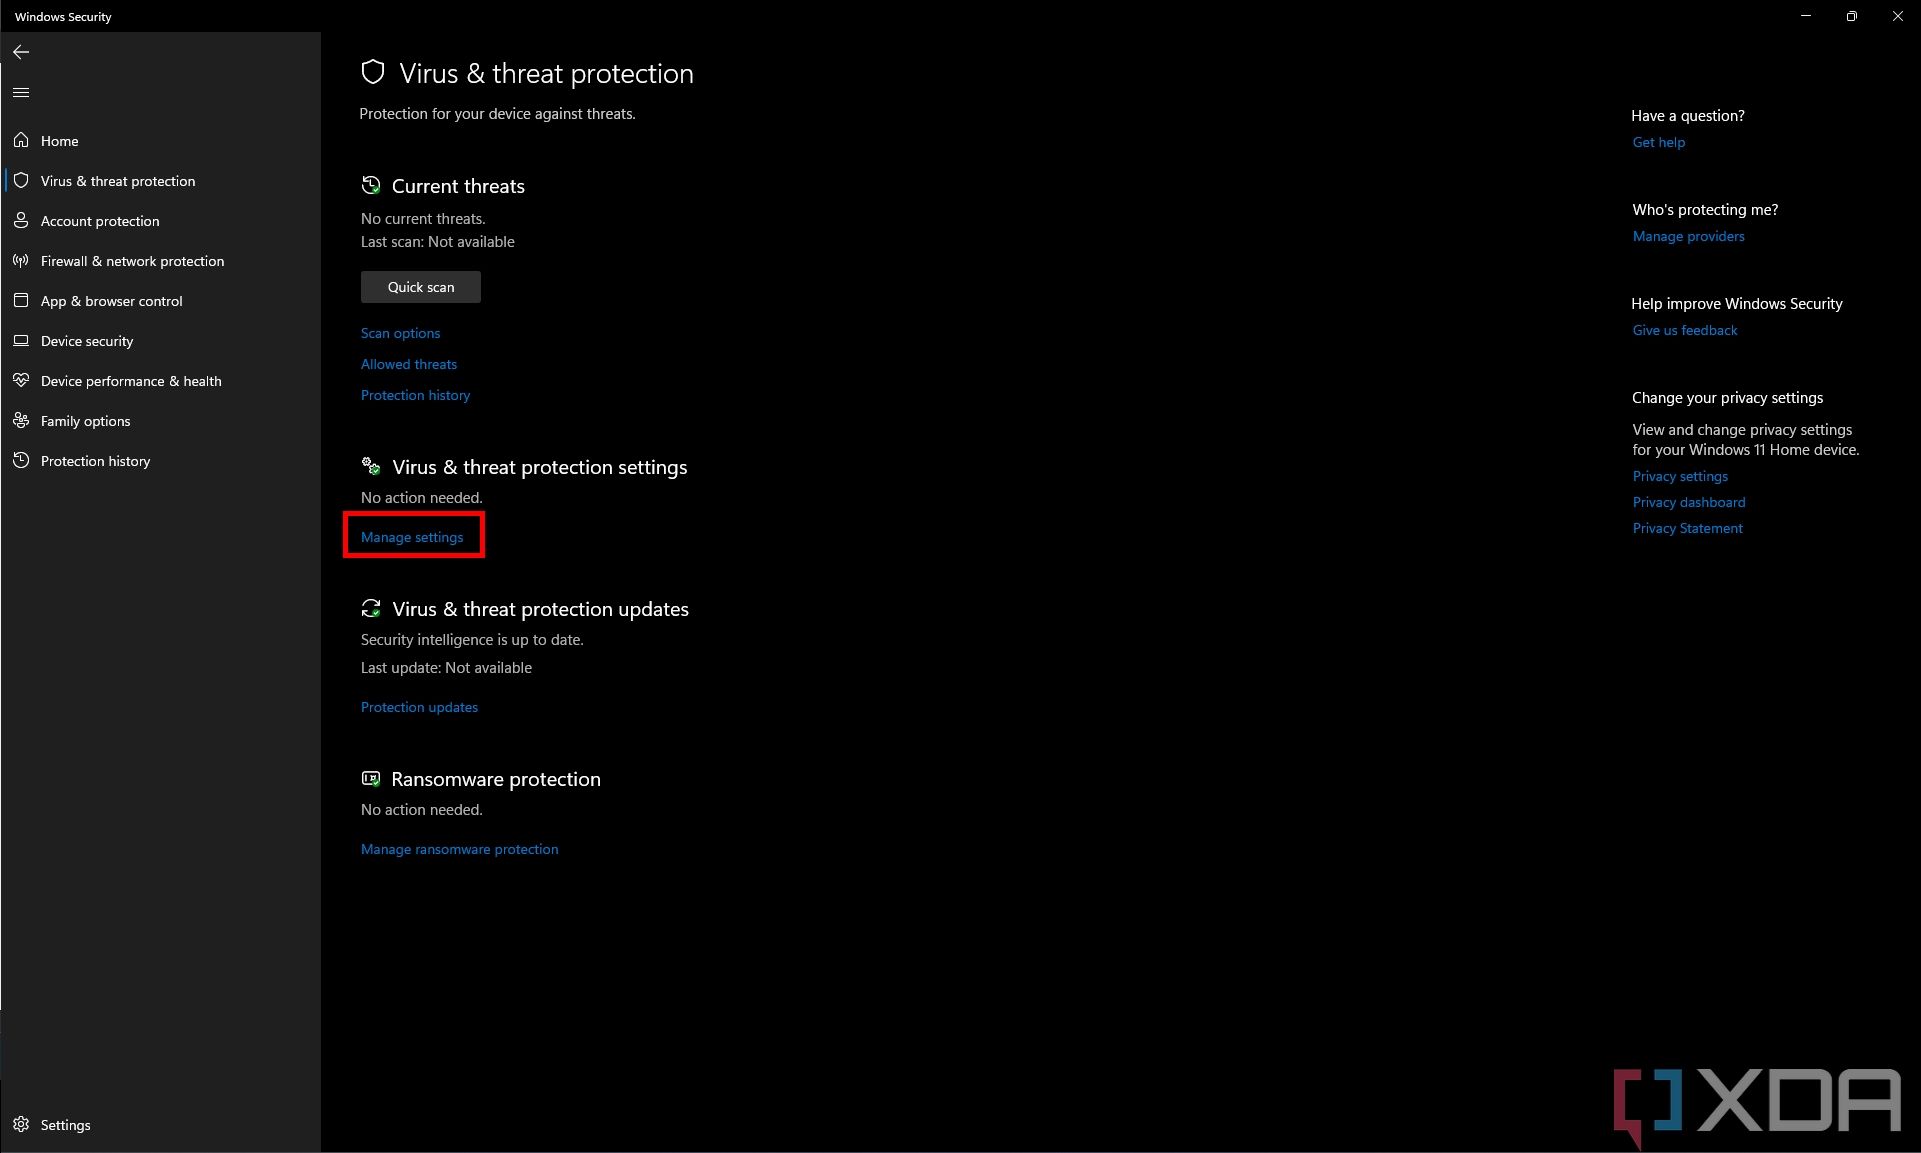 Screenshot of the Virus & threat protection section of the Windows Security app. The "manage settings" option is highlighted on the page.